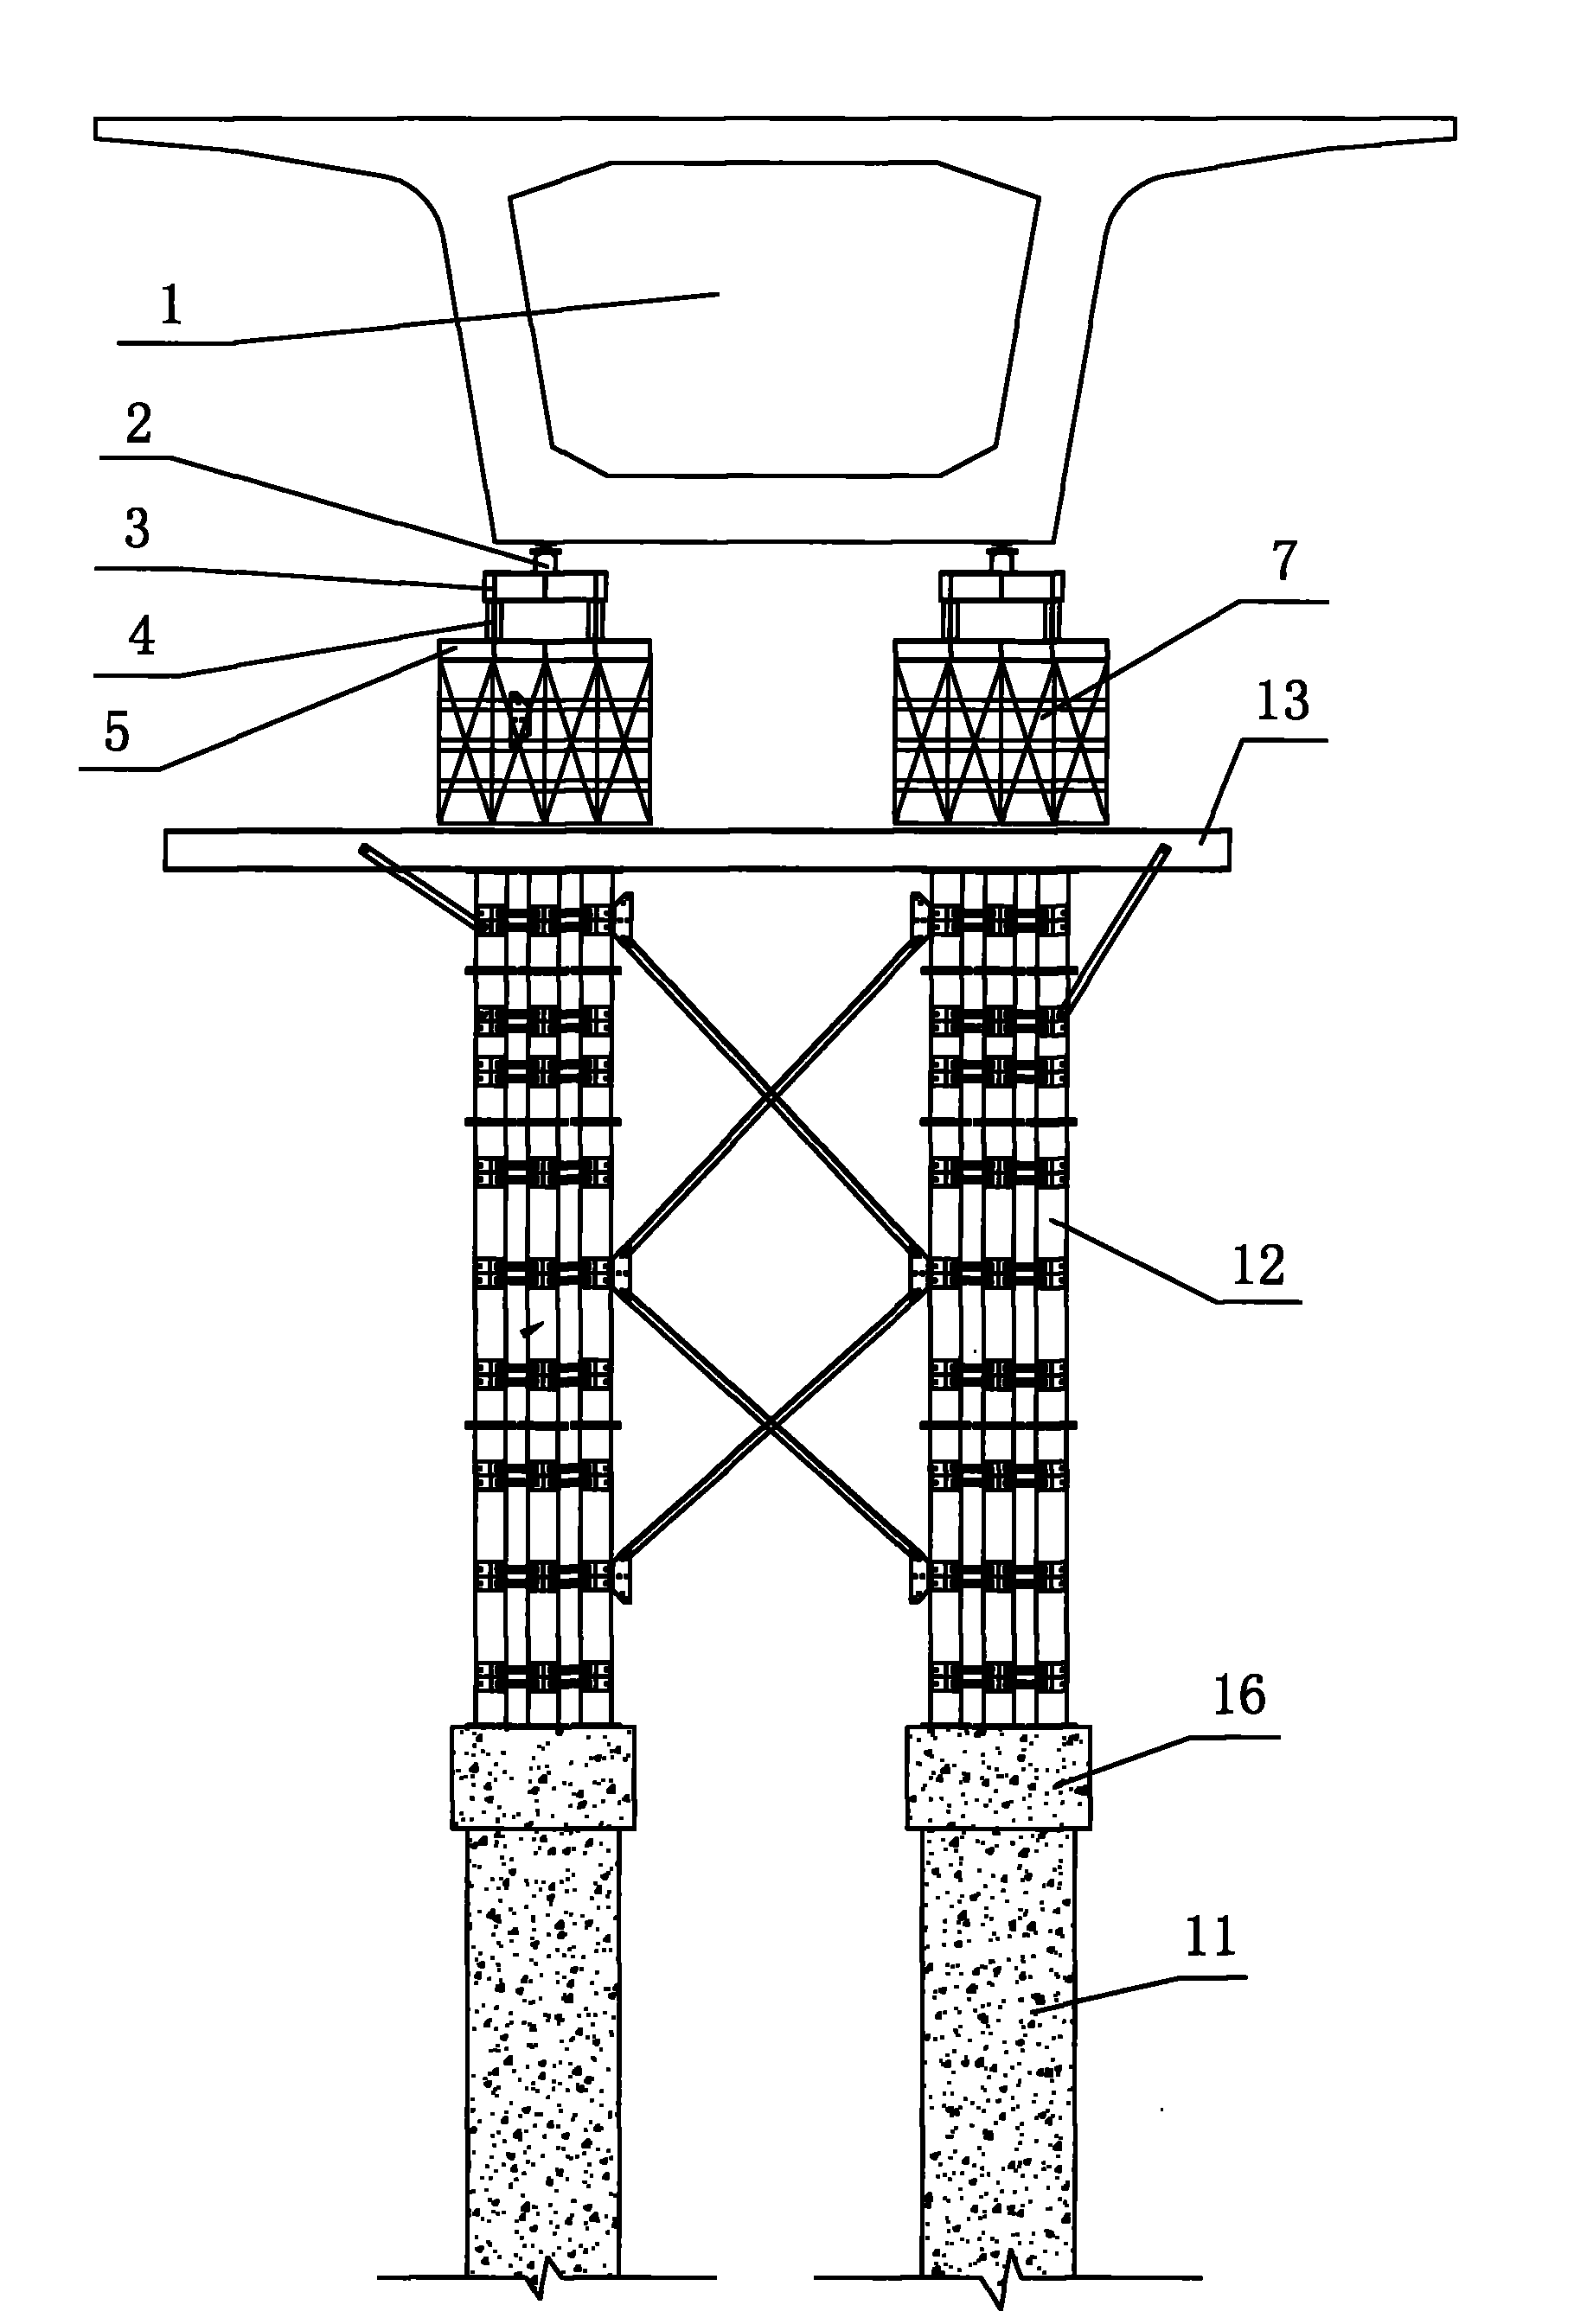 Segment-assembling simply supported box girder movable falsework construction method